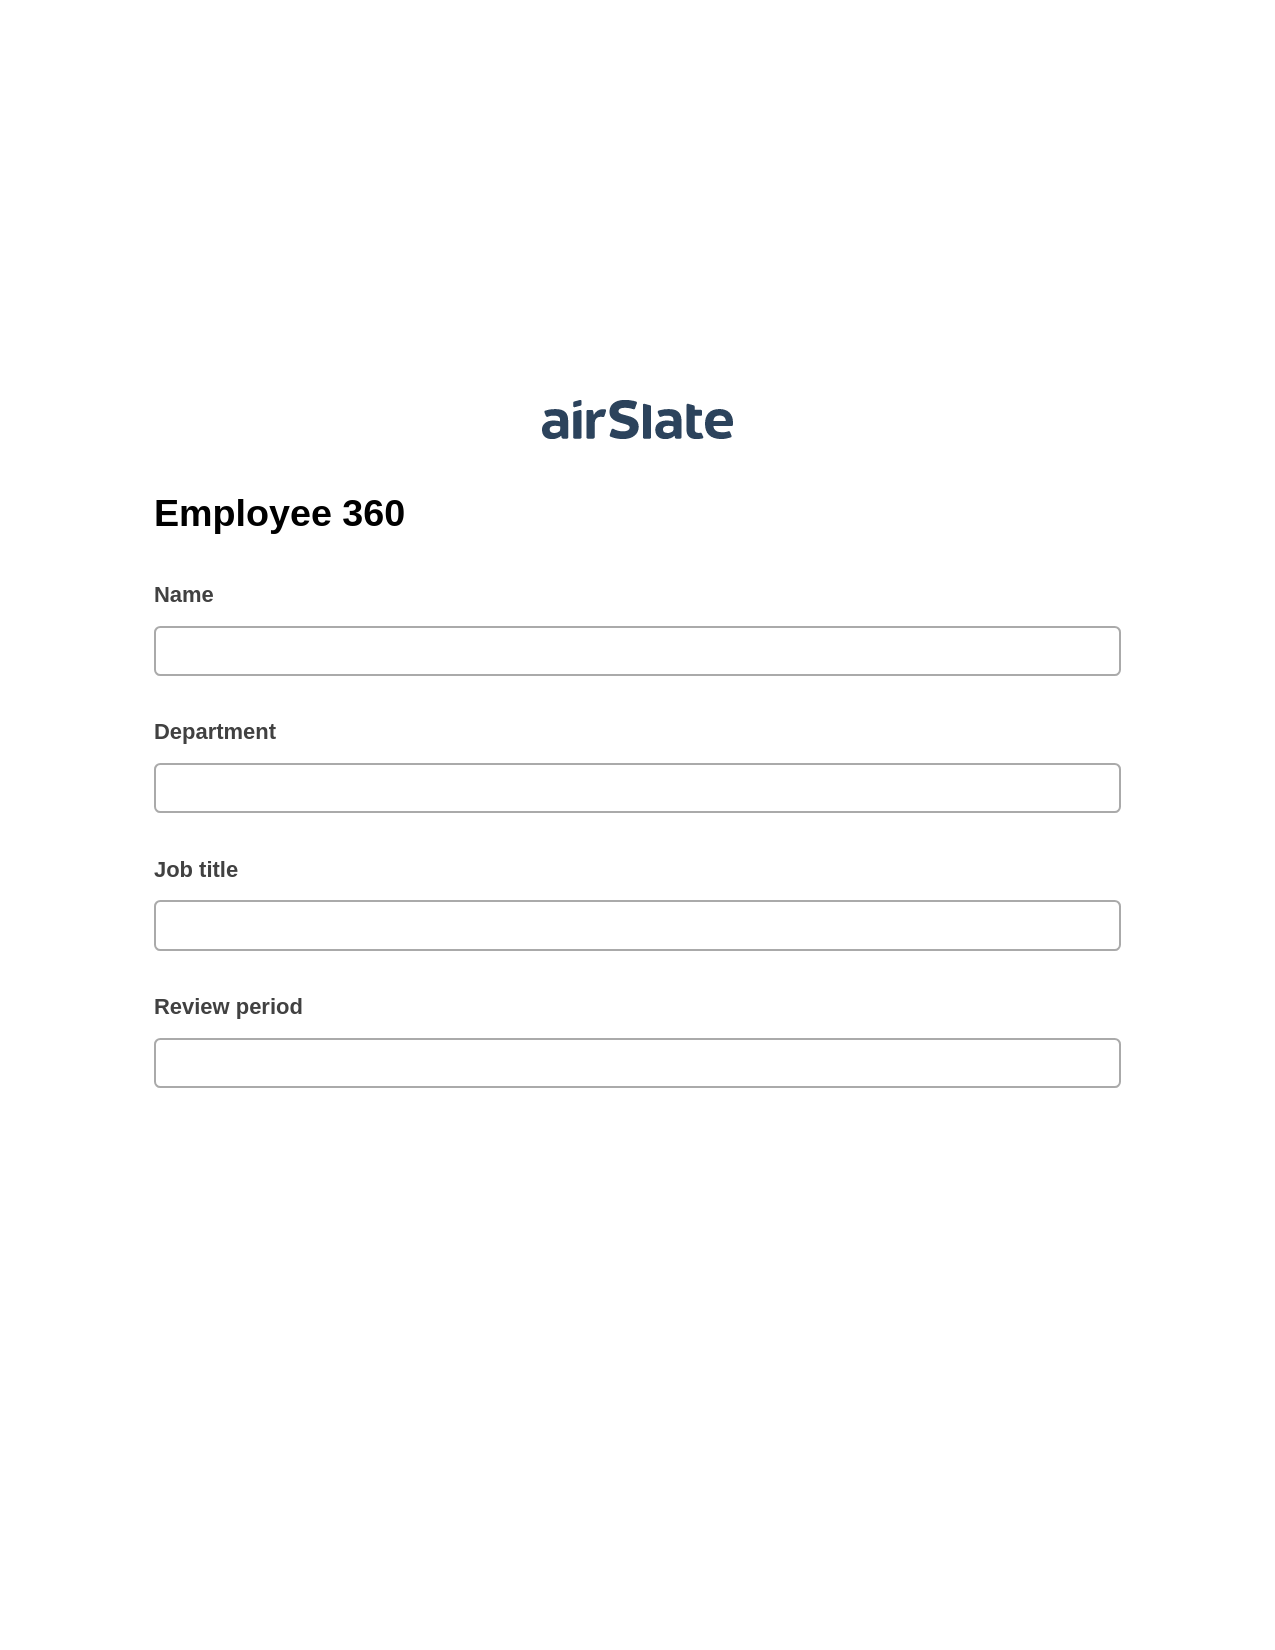 Employee 360 Pre-fill from another Slate Bot, Open under a Role Bot, Slack Two-Way Binding Bot